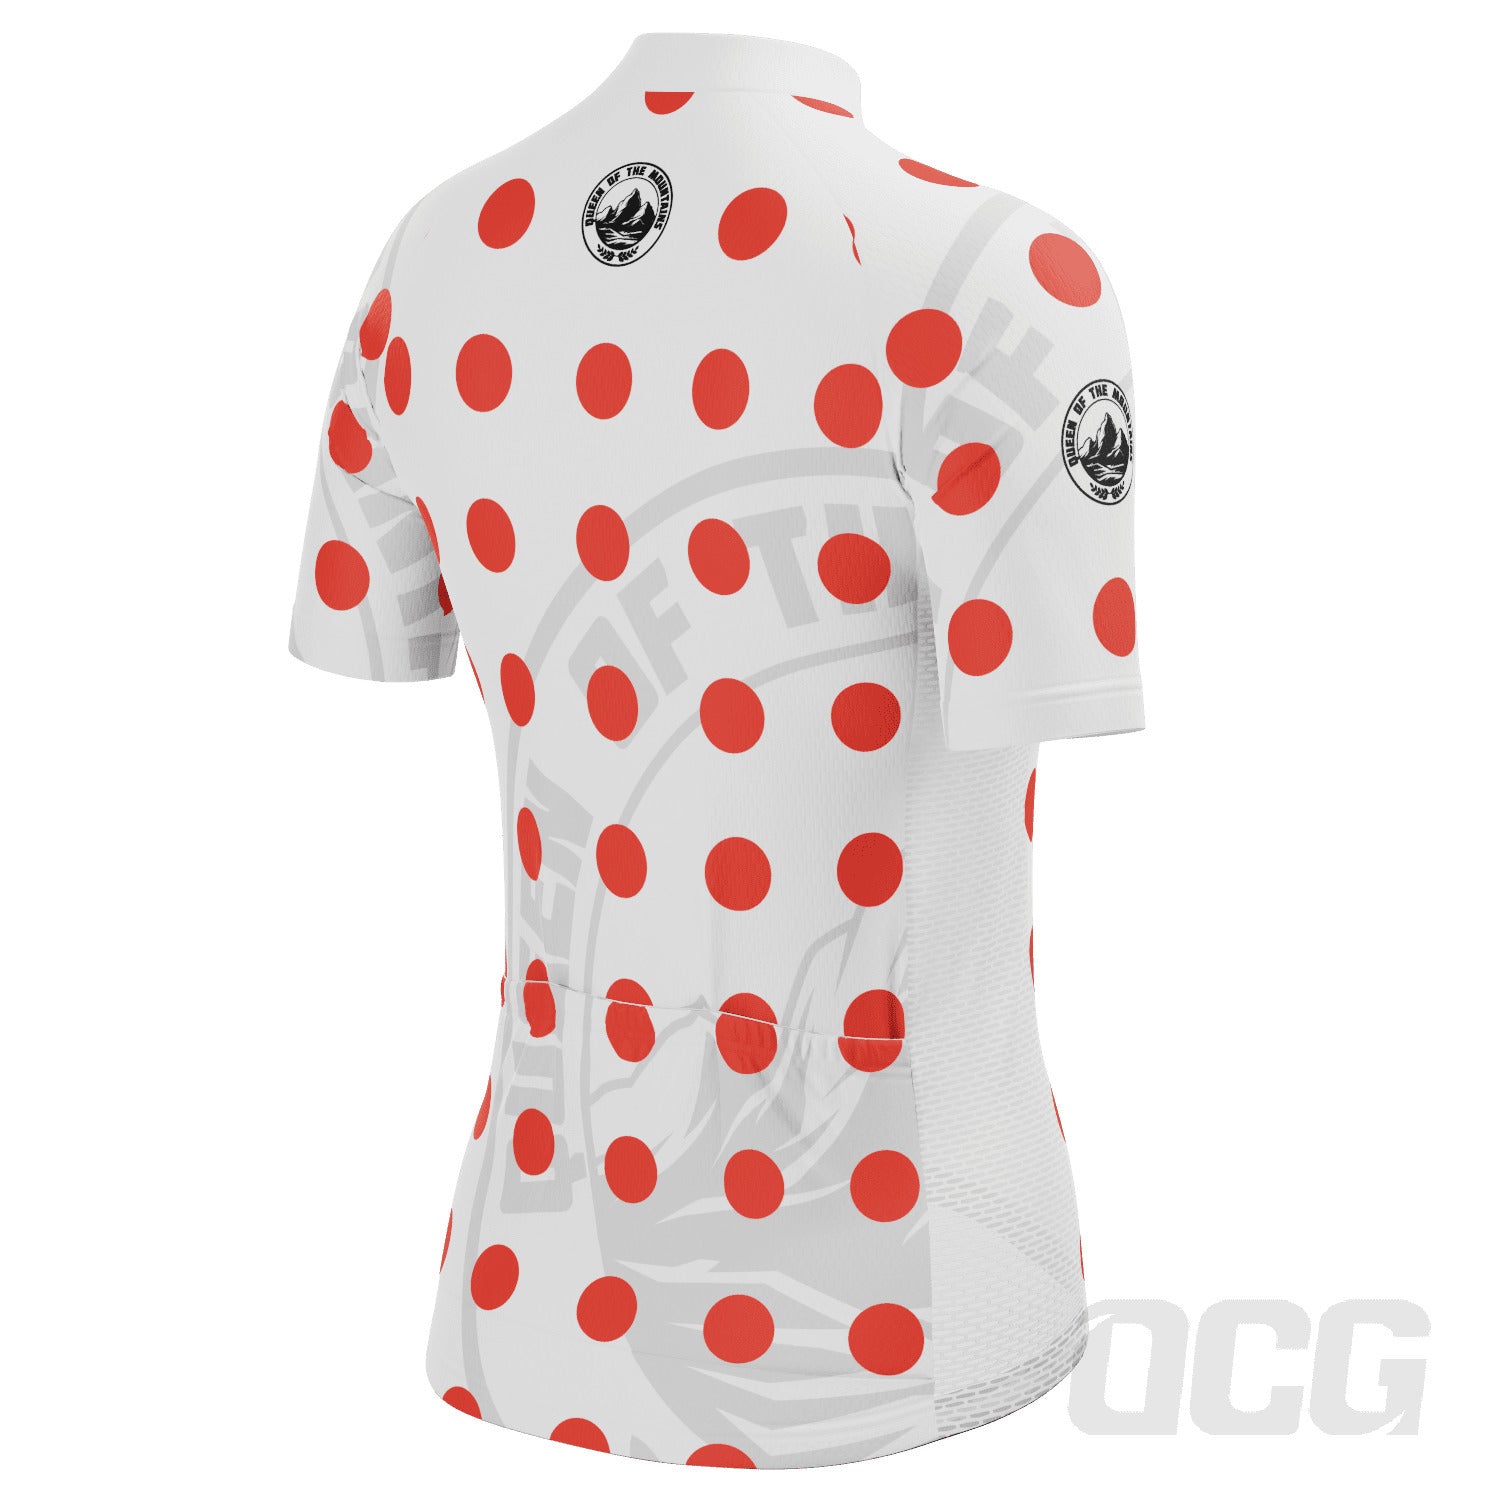 Women's King of the Mountains Polka Dot Short Sleeve Cycling Jersey